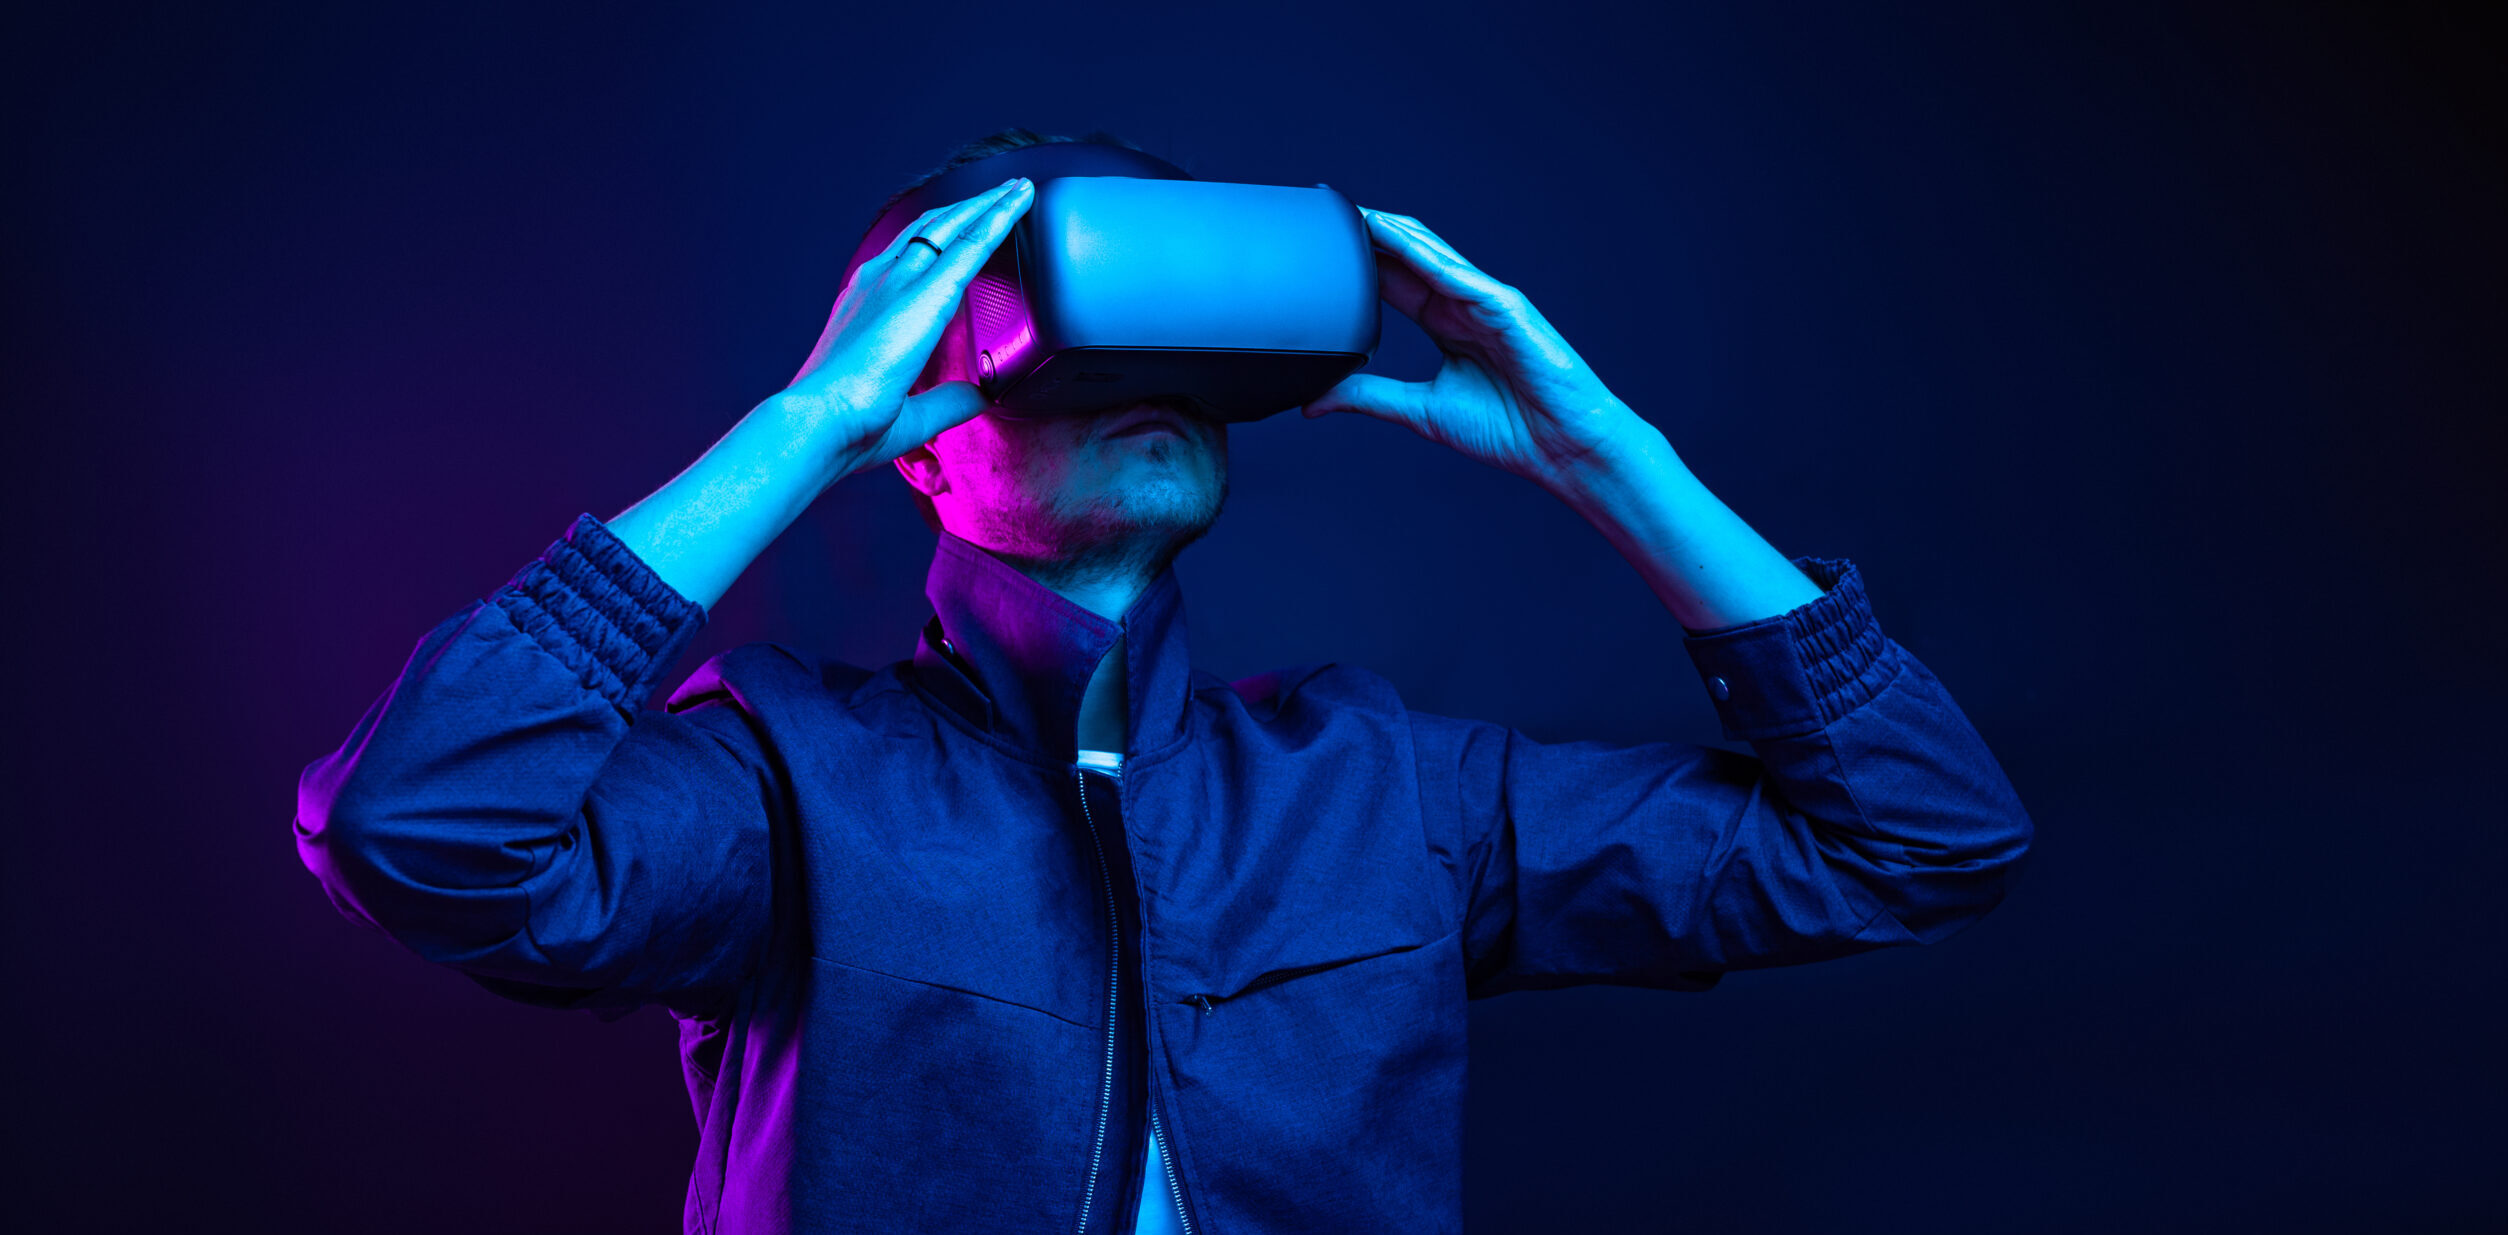 Exploring How Virtual Reality Can Improve Well-Being